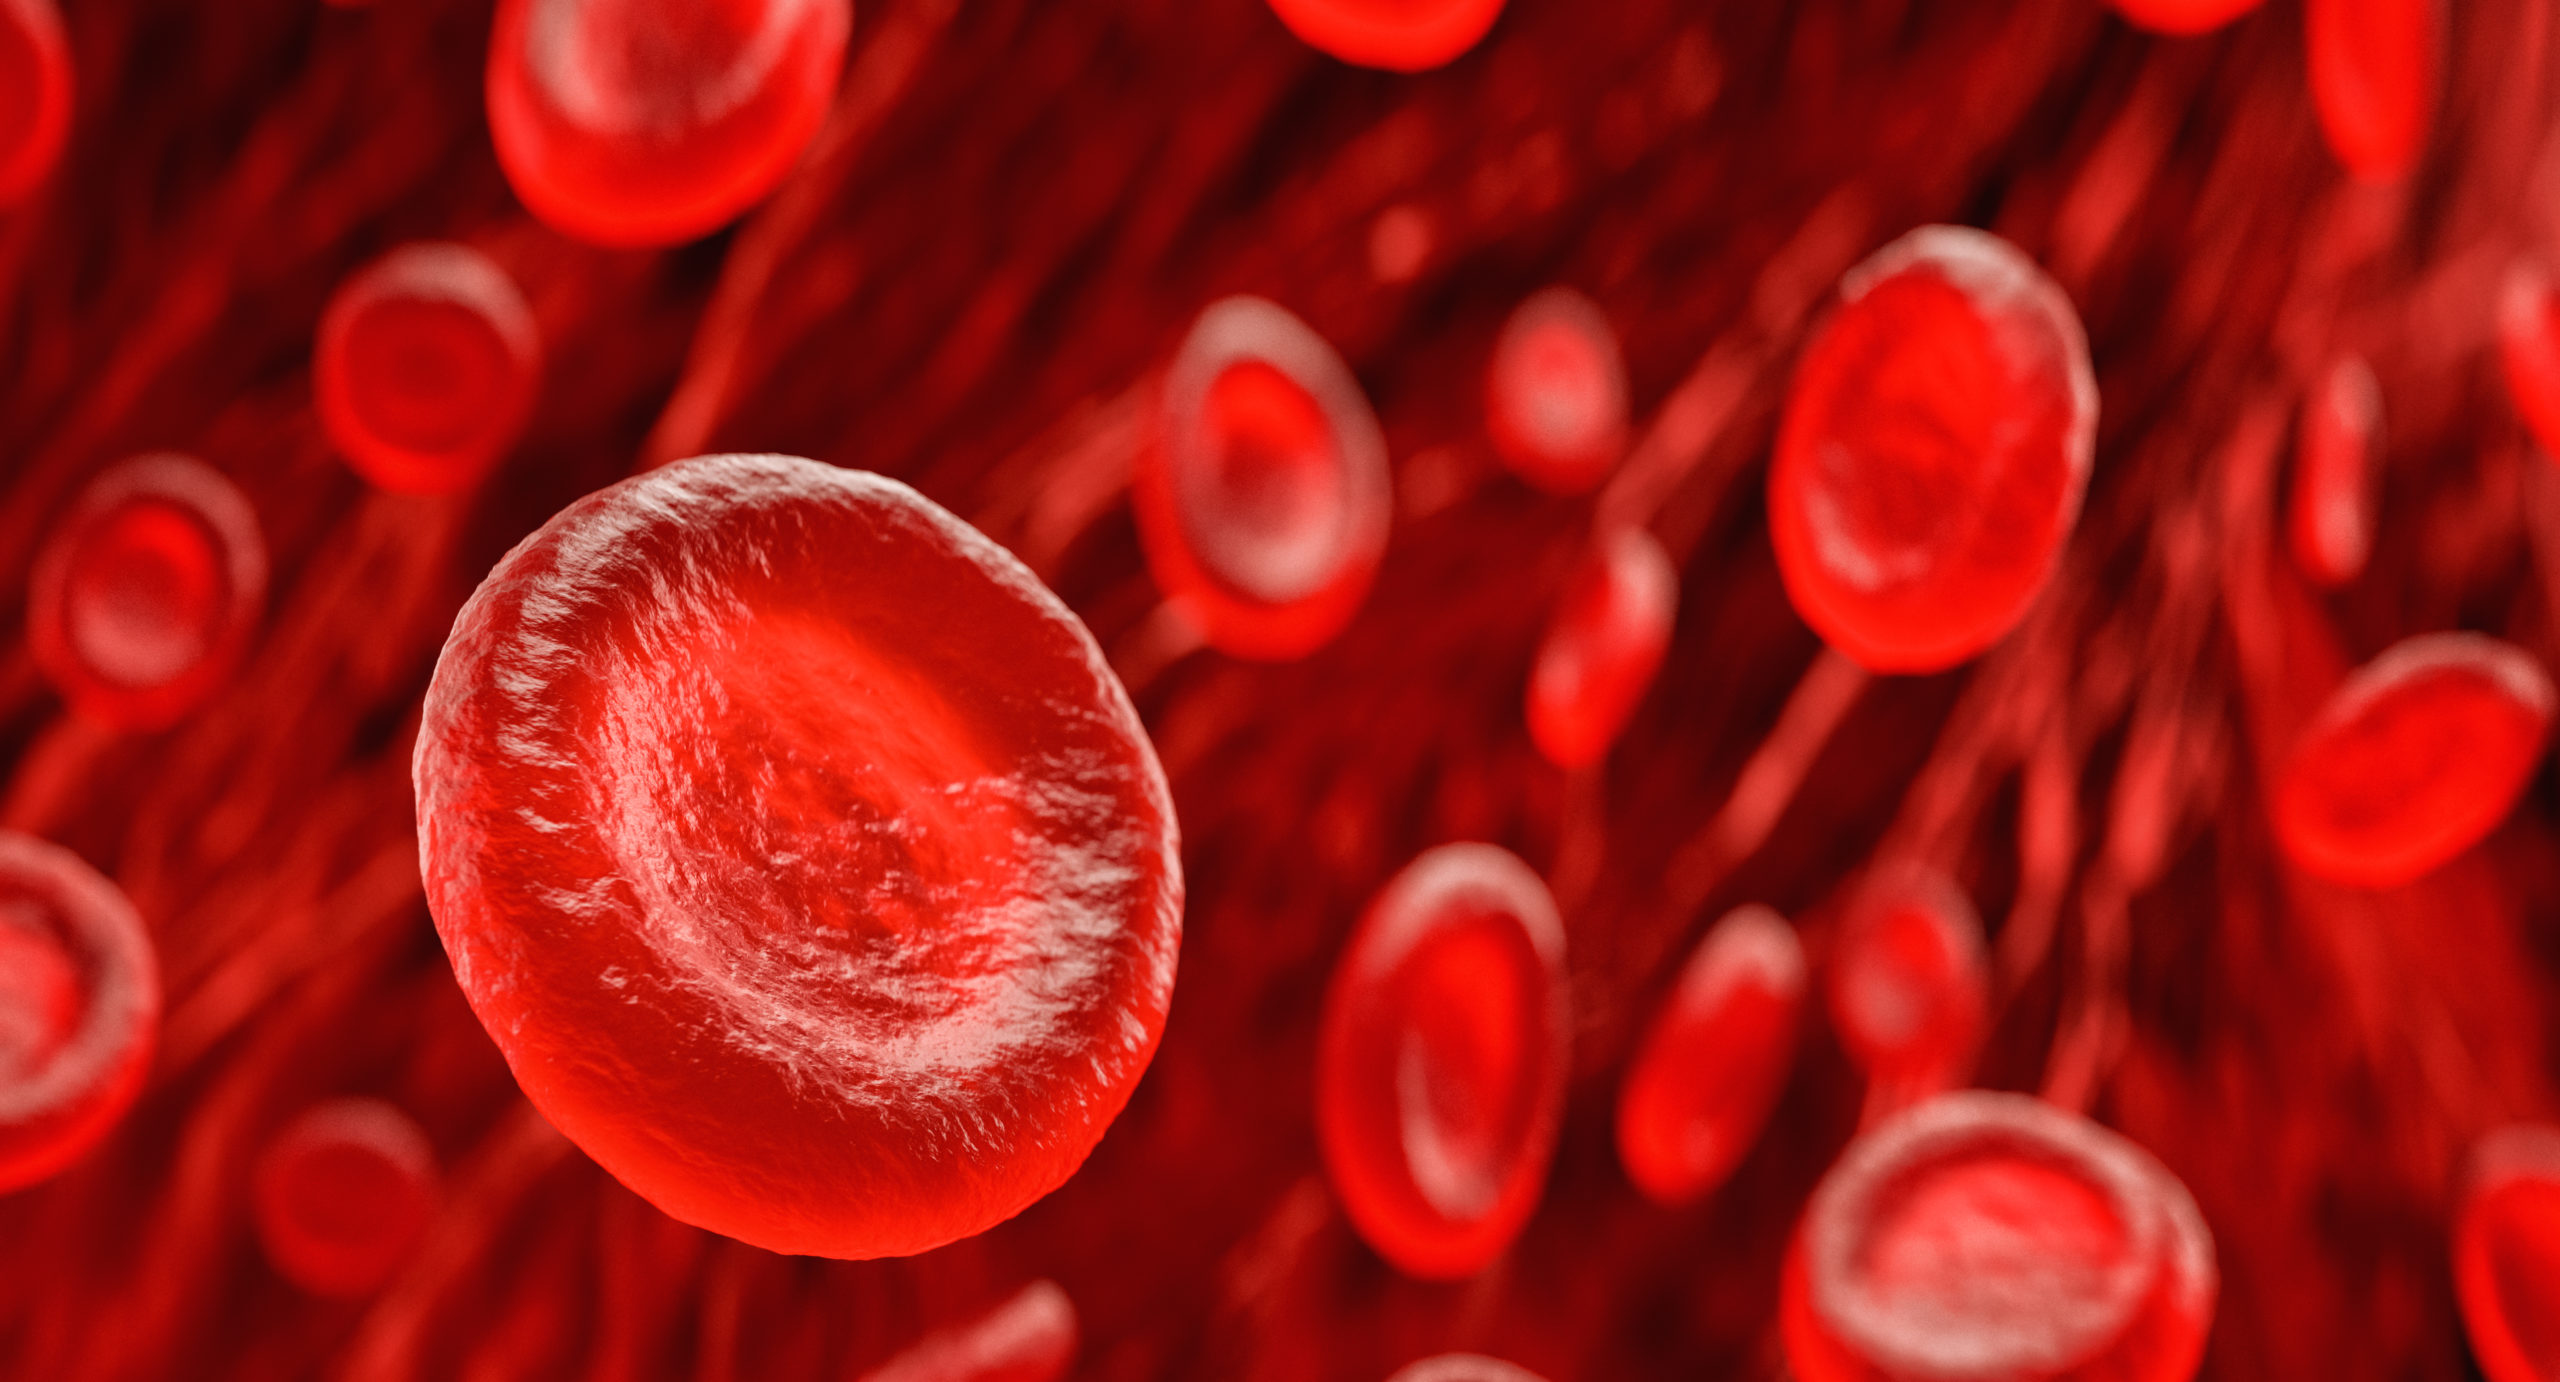 Red Blood Cell Transfusions in Patients With CKD and Anemia